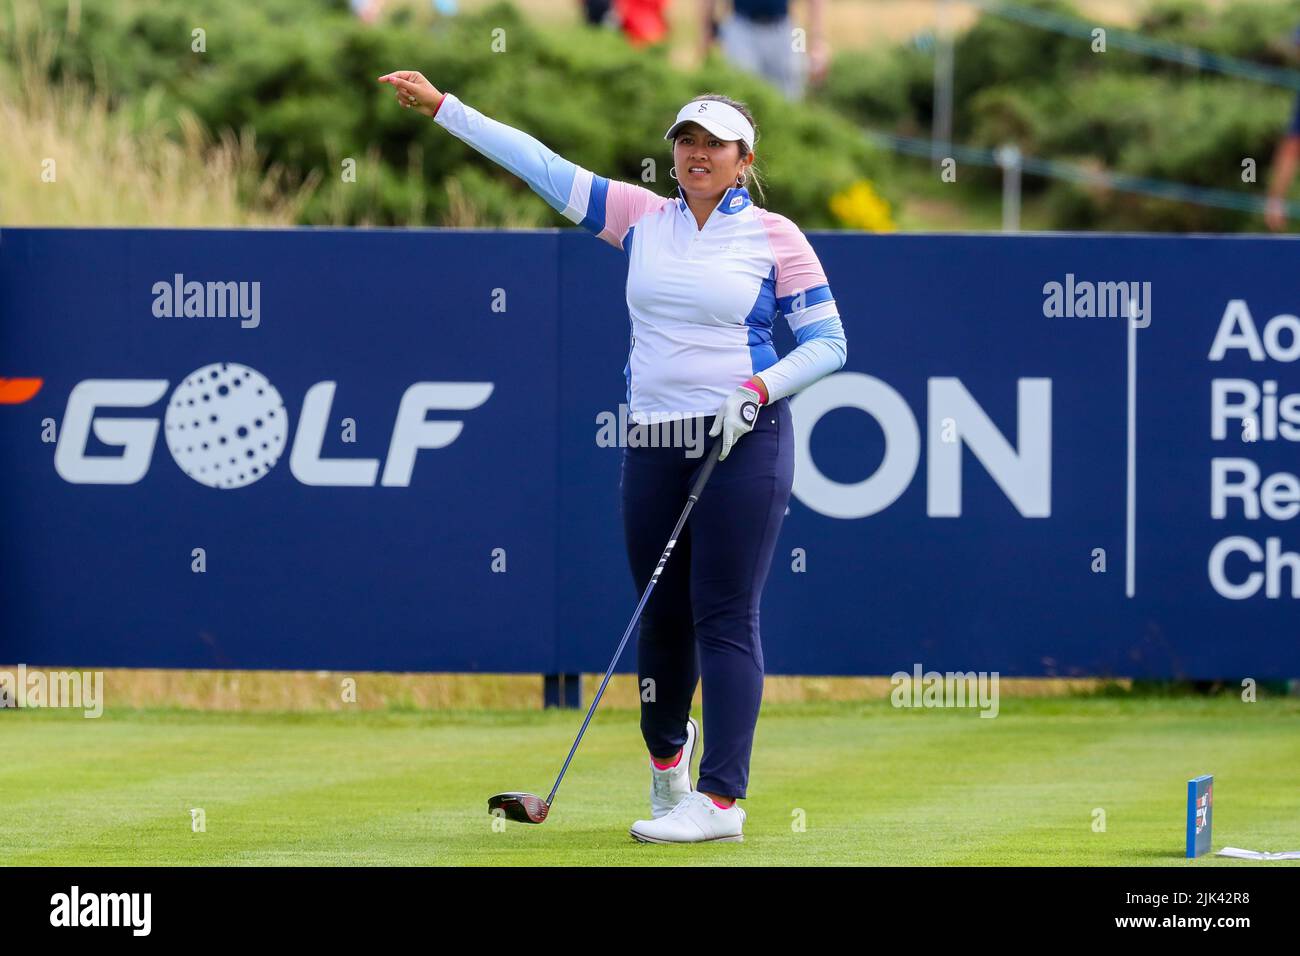 Irvine, UK. 30th July, 2022. The third round of the Trust Golf Women's Scottish Golf took place with 75 players making the cut. Heavy overnight rain from Friday into Saturday made for a softer and more testing course. Lilia Vu teeing off at 13th and pushed the shot right and calling 'Fore'. Credit: Findlay/Alamy Live News Stock Photo